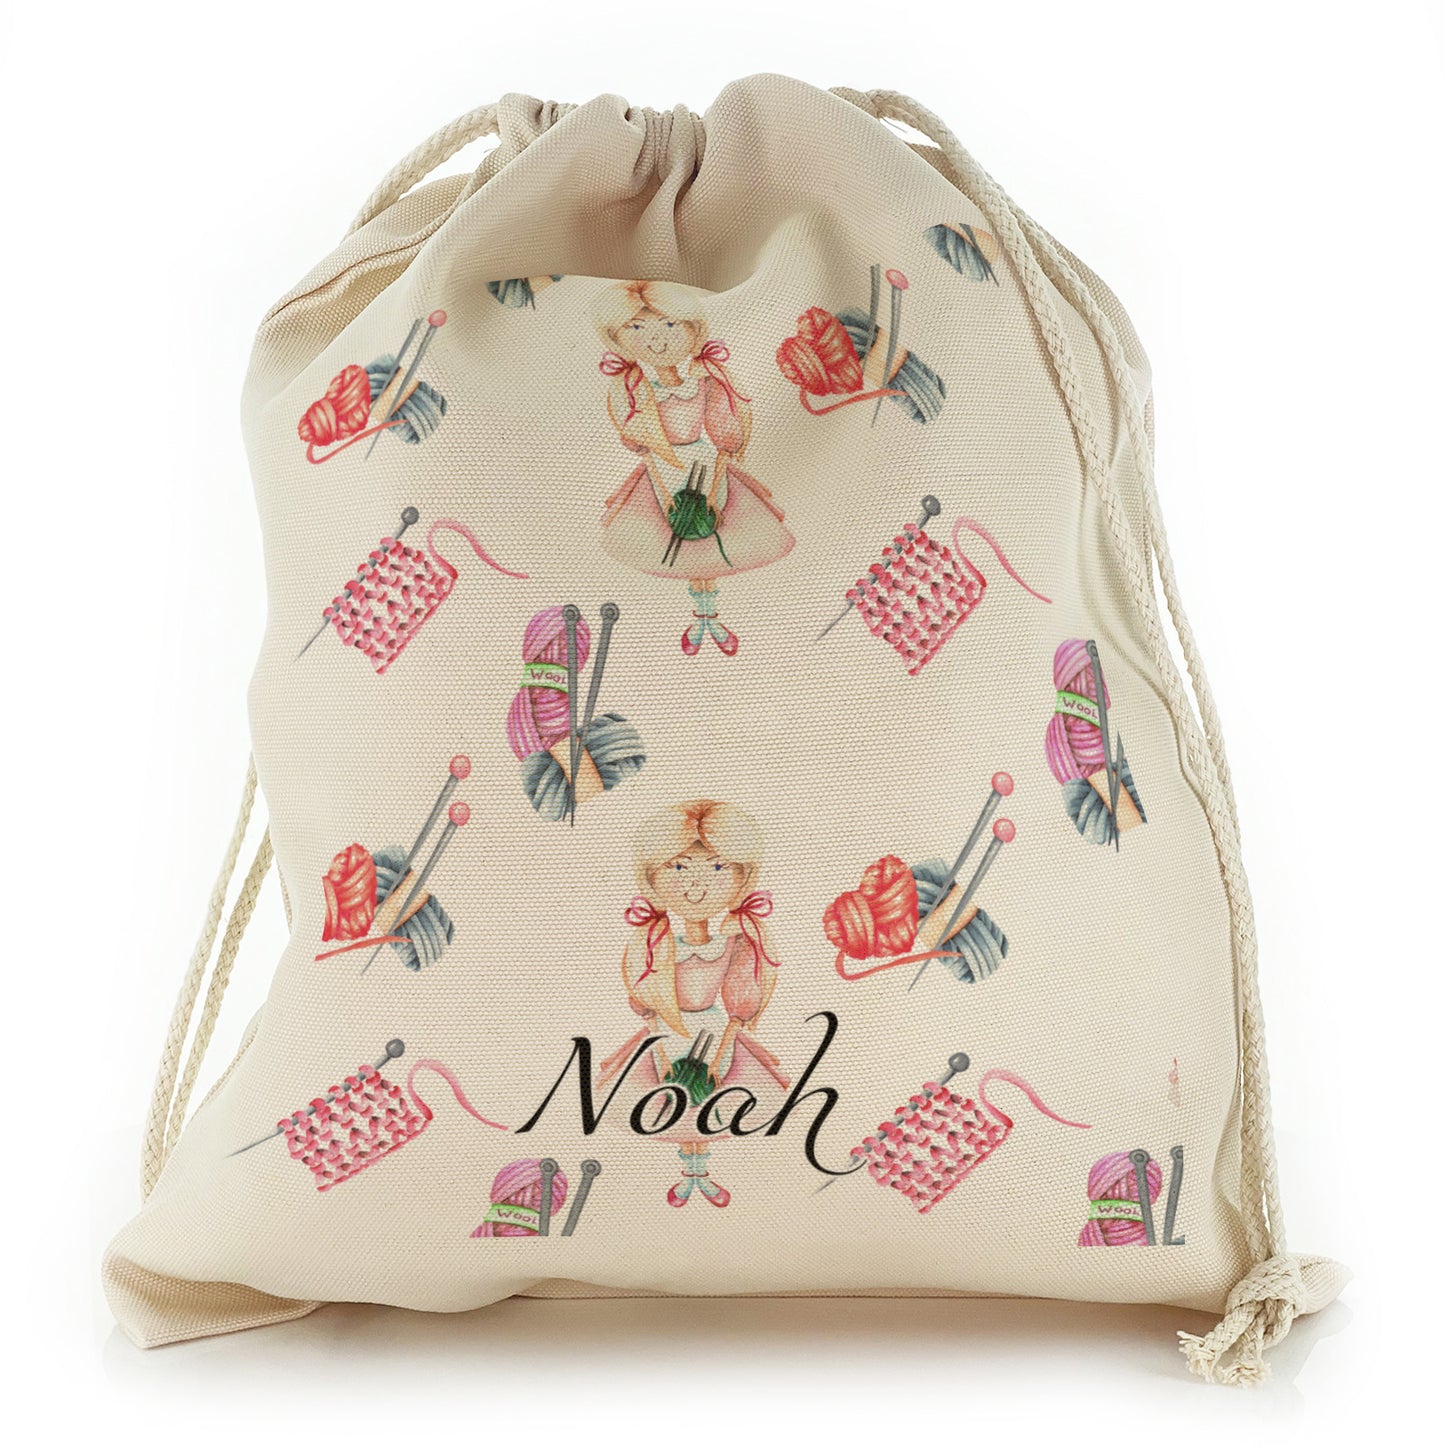 Personalised Canvas Sack with Stylish Text on Knitting Girl and Pink Knitted Yarn Pattern 